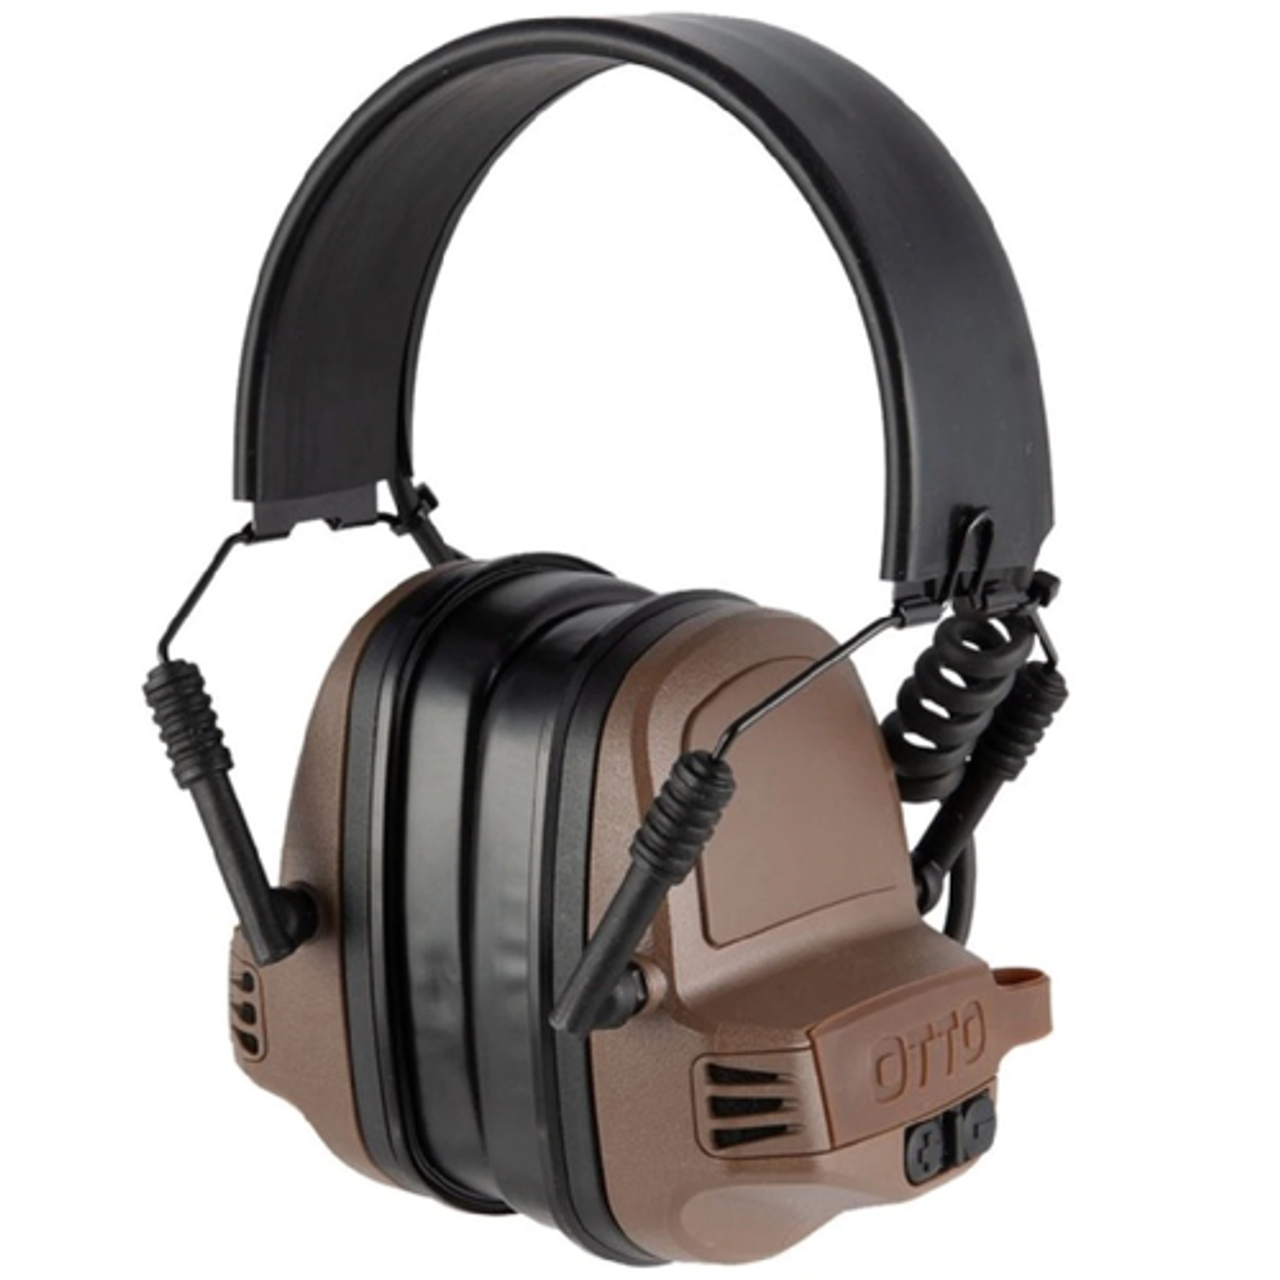 Head Radio Tactical Business SA V4-11072FD Headset Wireless HiTech Over the Range - Two OTTO Store - Way NoizeBarrier